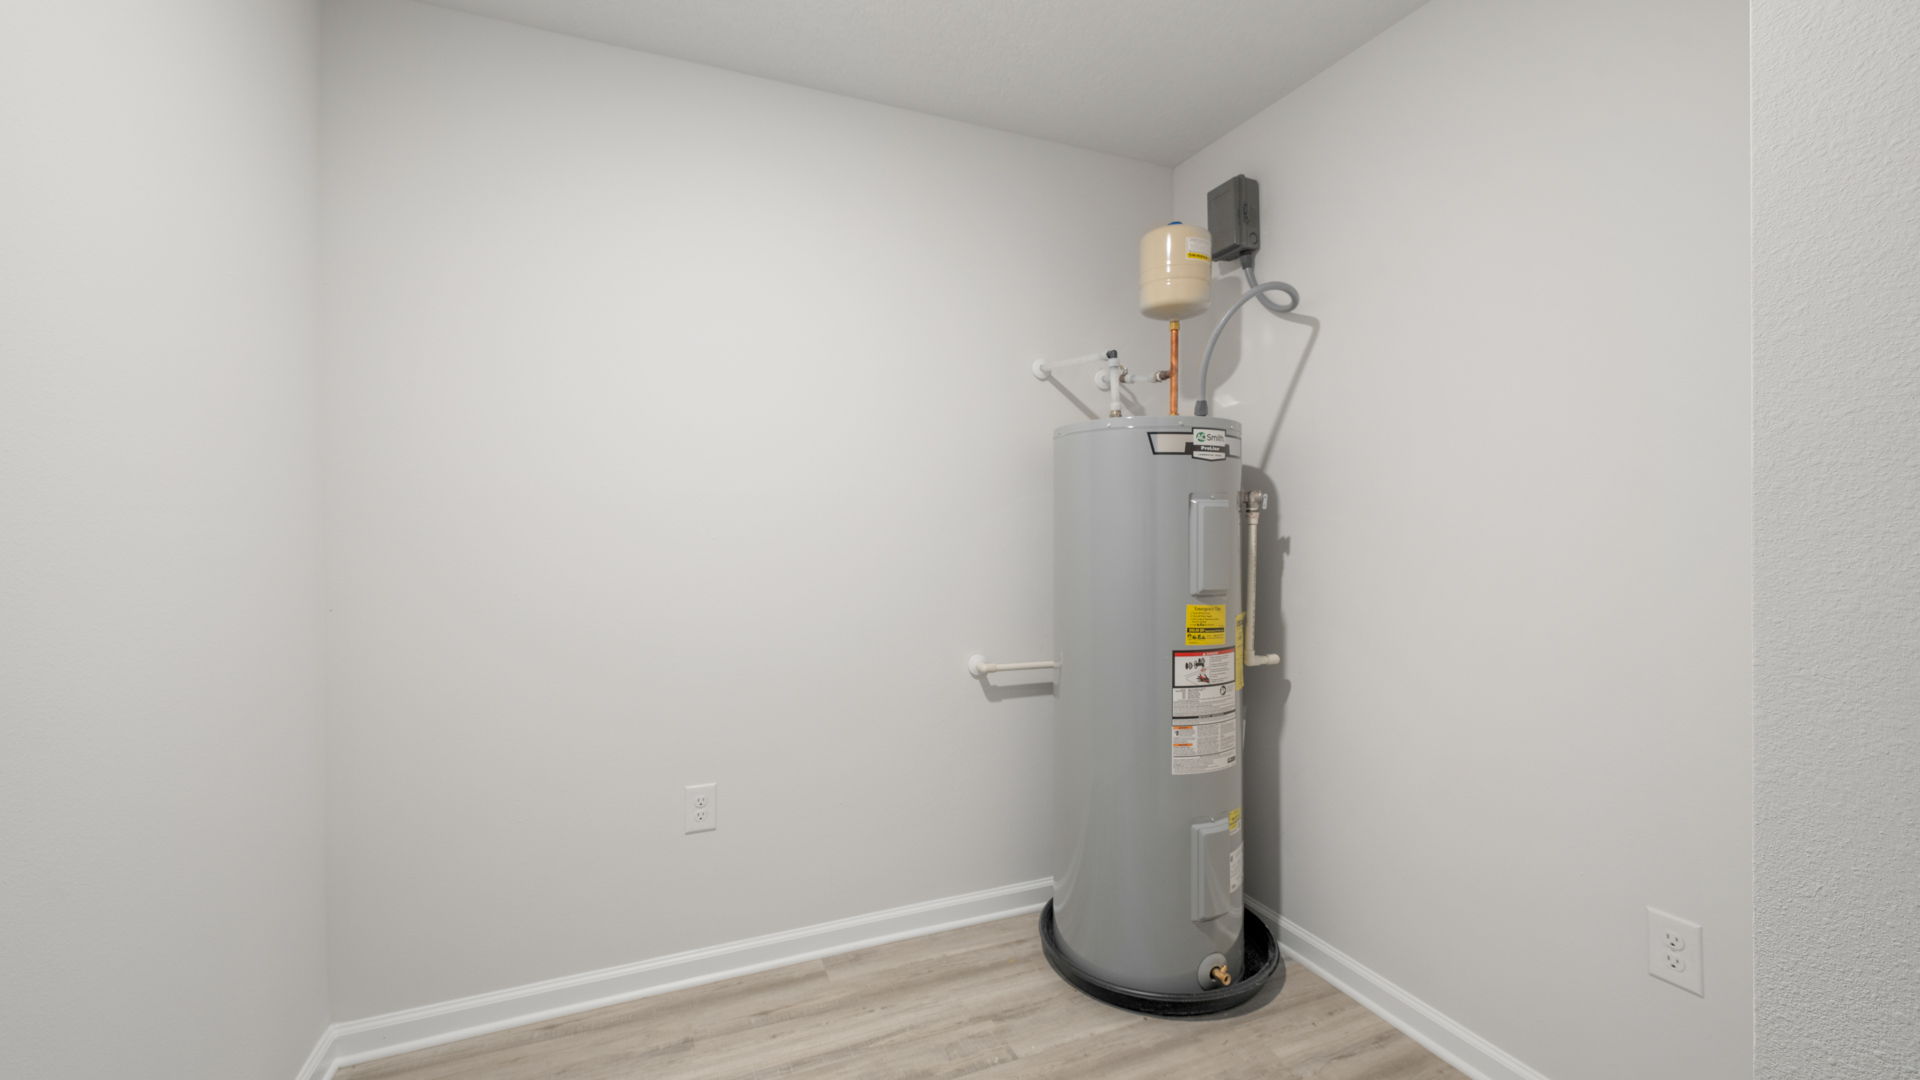 Extra space with water heater.